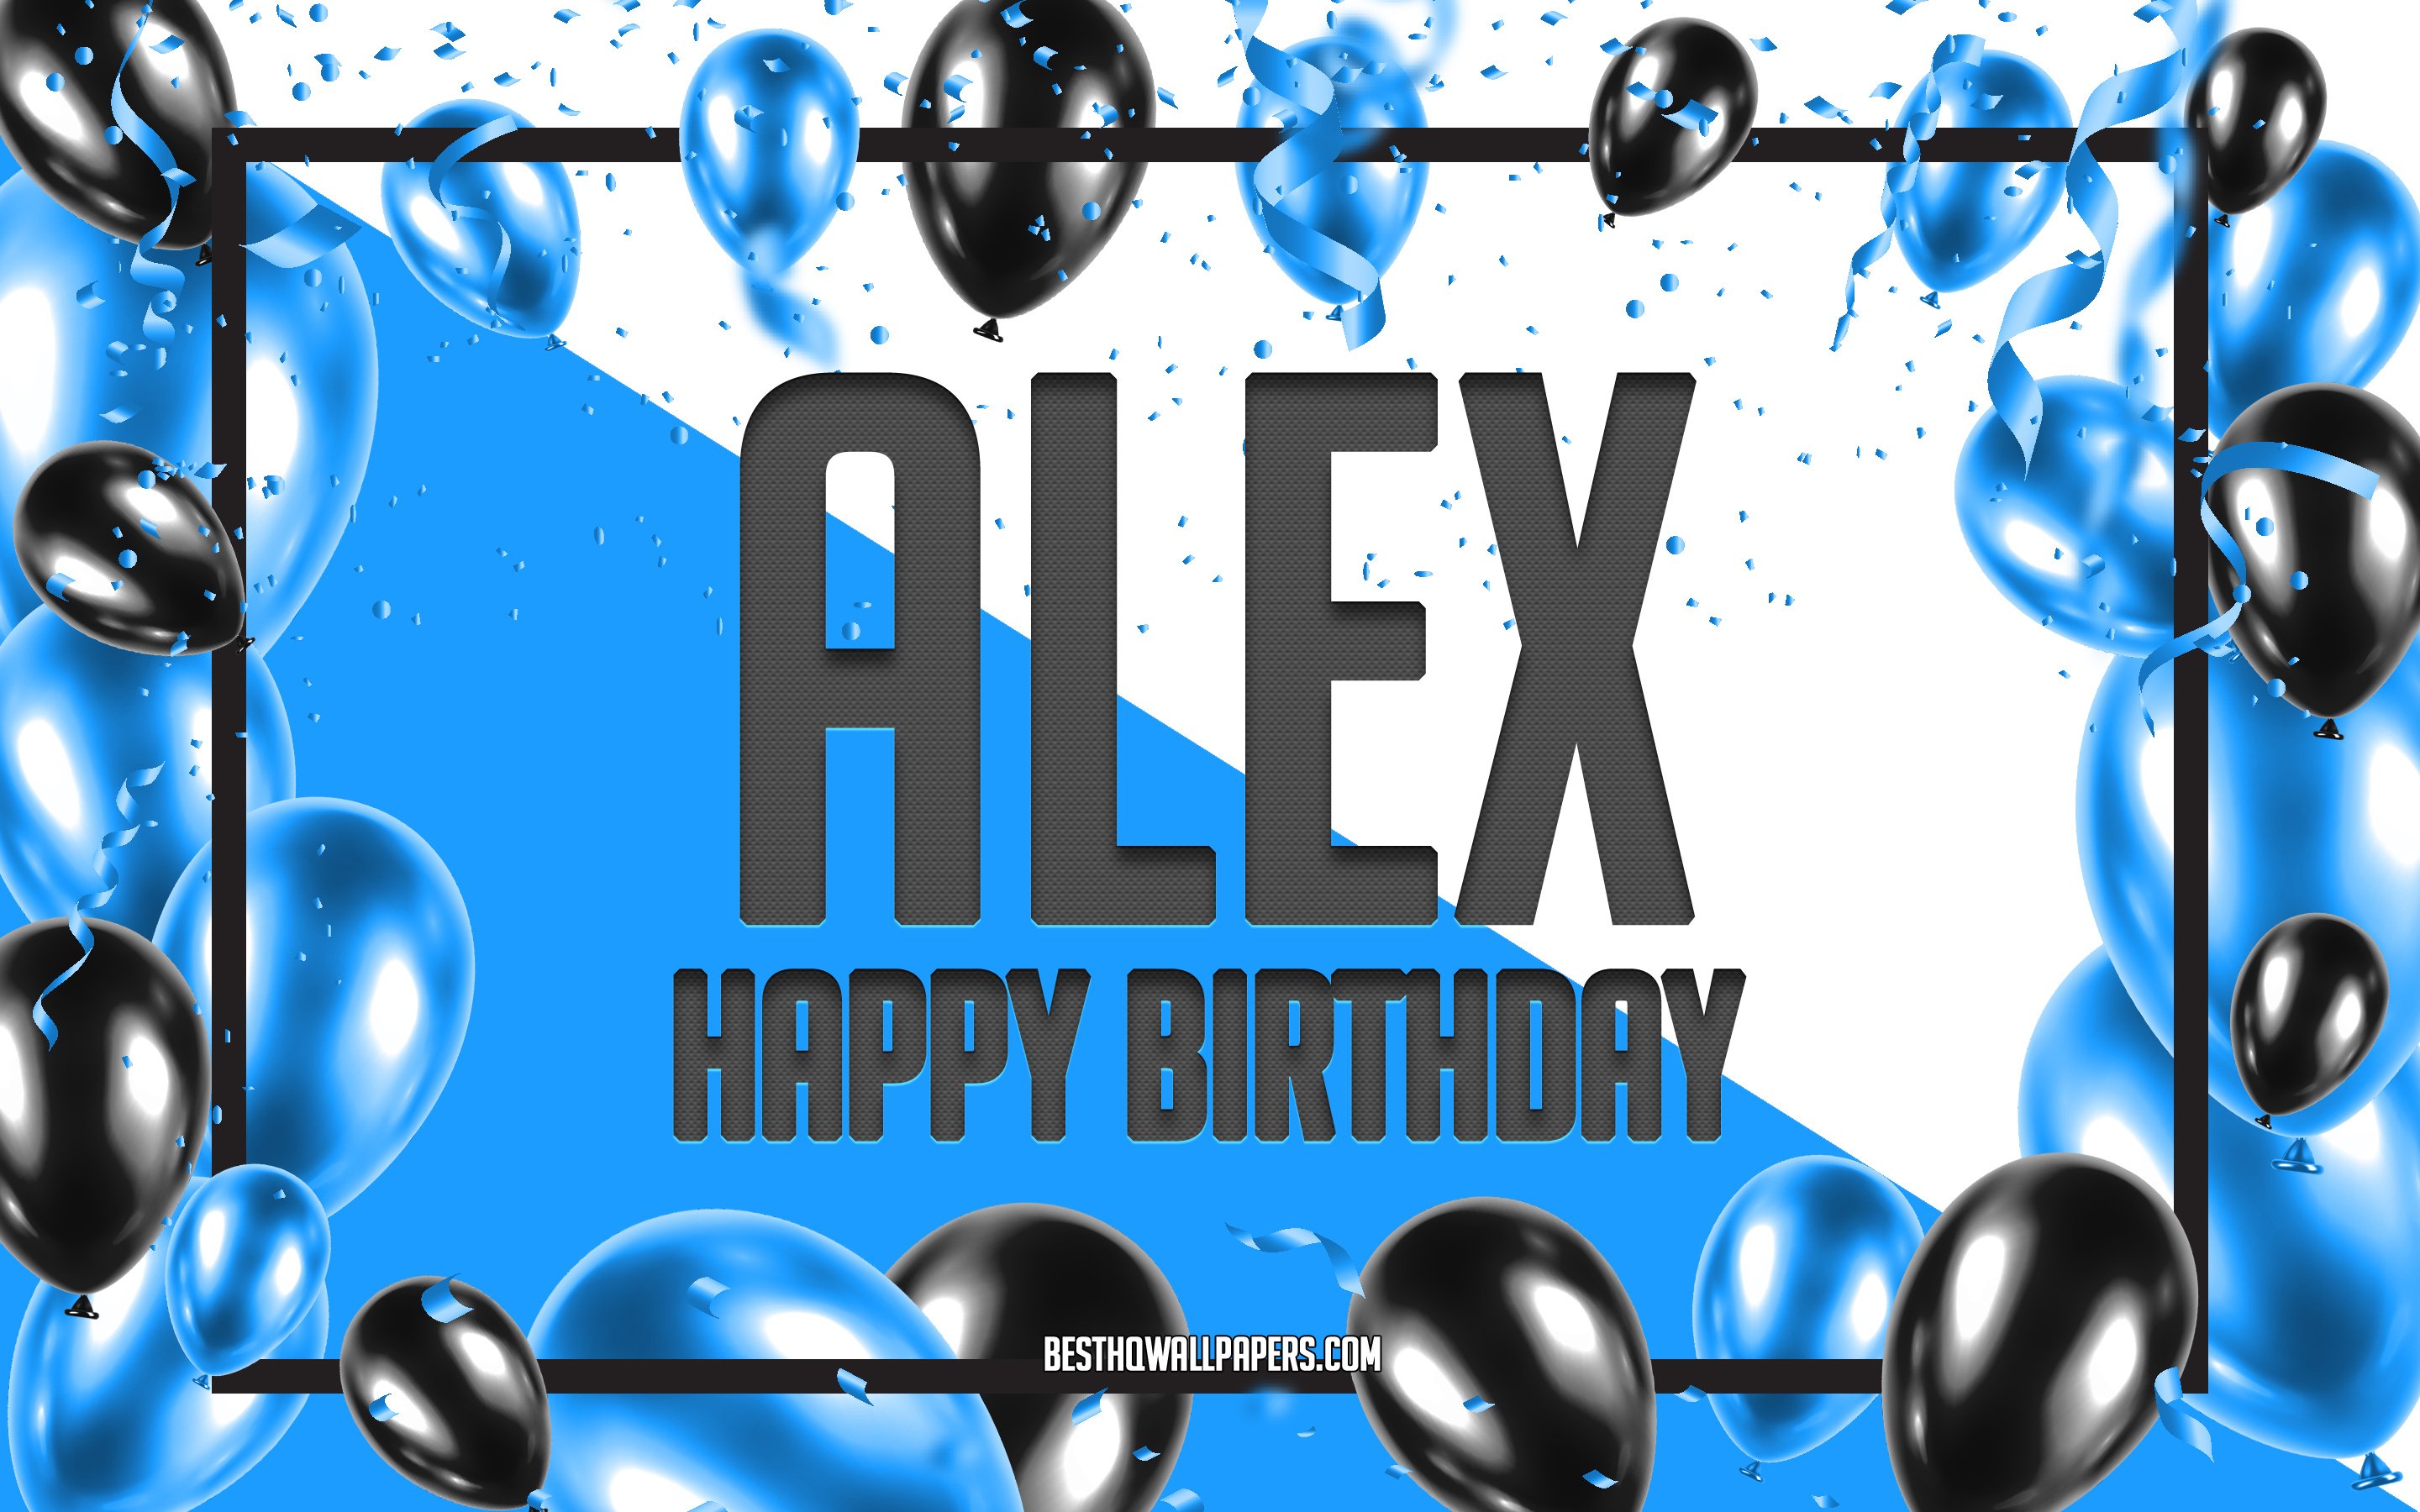 Download wallpapers Happy Birthday Alex, Birthday Balloons Background, Alex, wallpapers with names, Alex Happy Birthday, Blue Balloons Birthday Background, greeting card, Alex Birthday for desktop with resolution 2880x1800. High Quality HD pictures